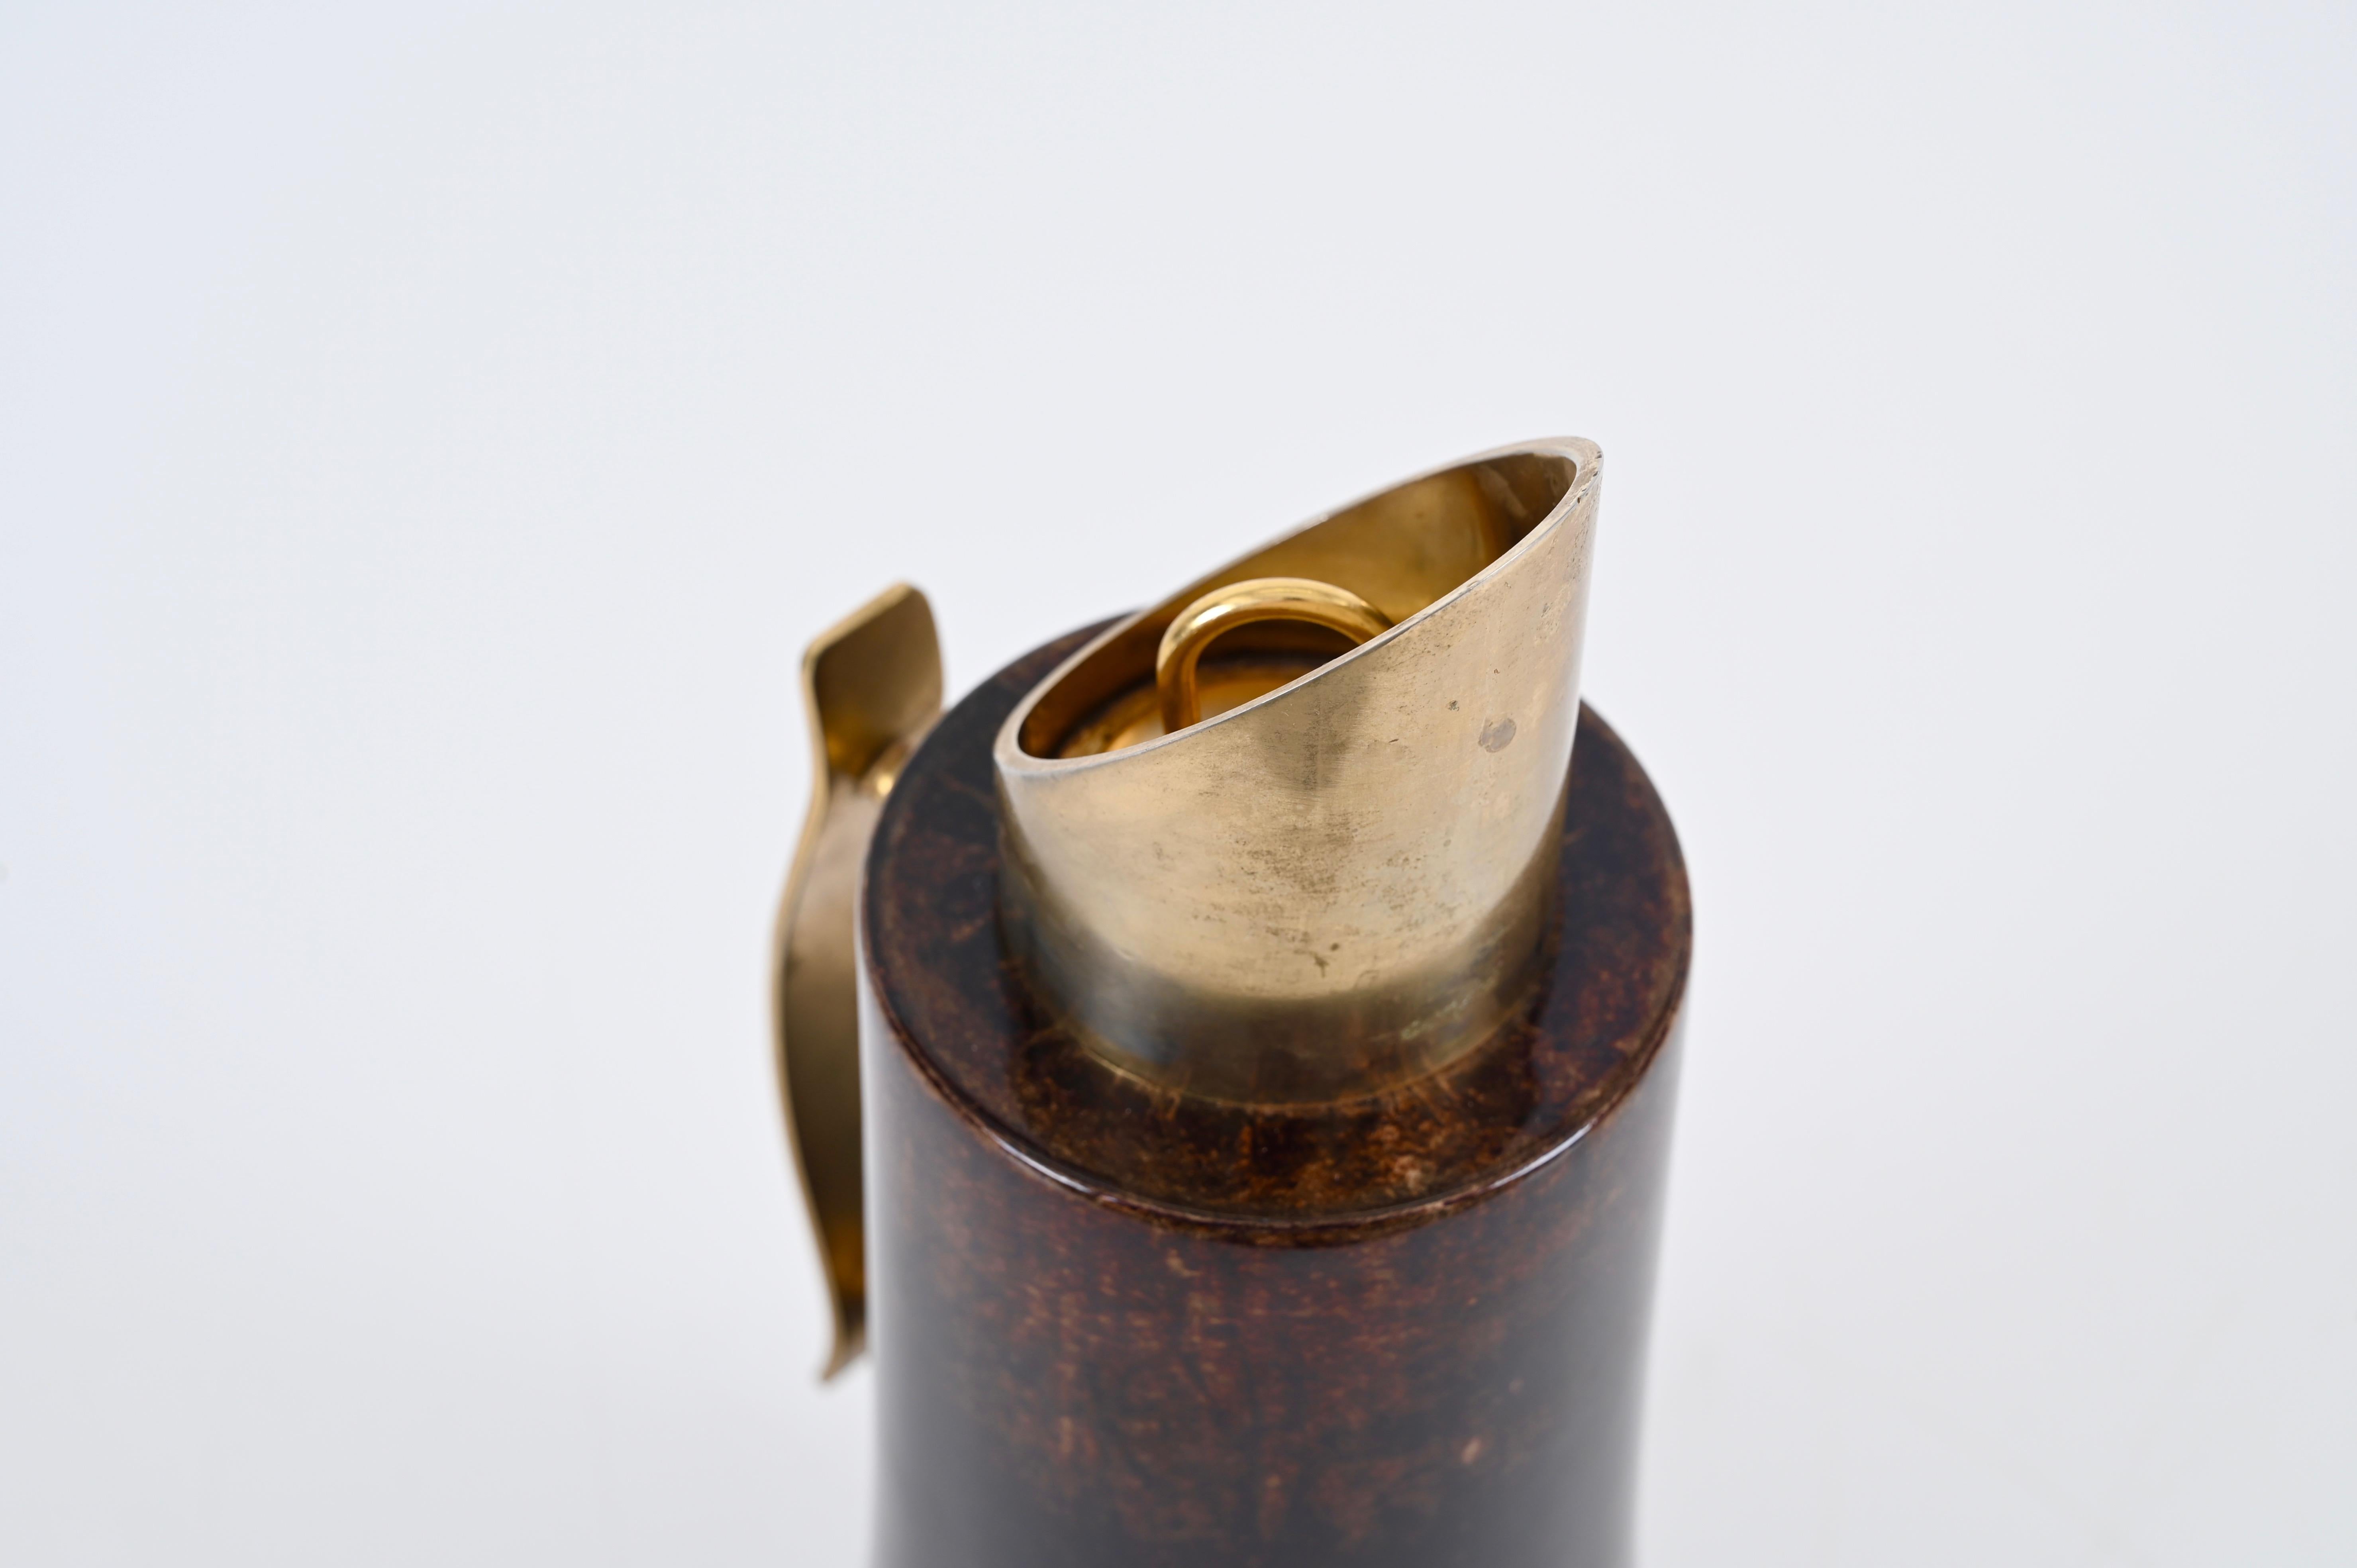 Aldo Tura Midcentury Goatskin and Brass Thermos Decanter for Macabo, Italy 1950s For Sale 4